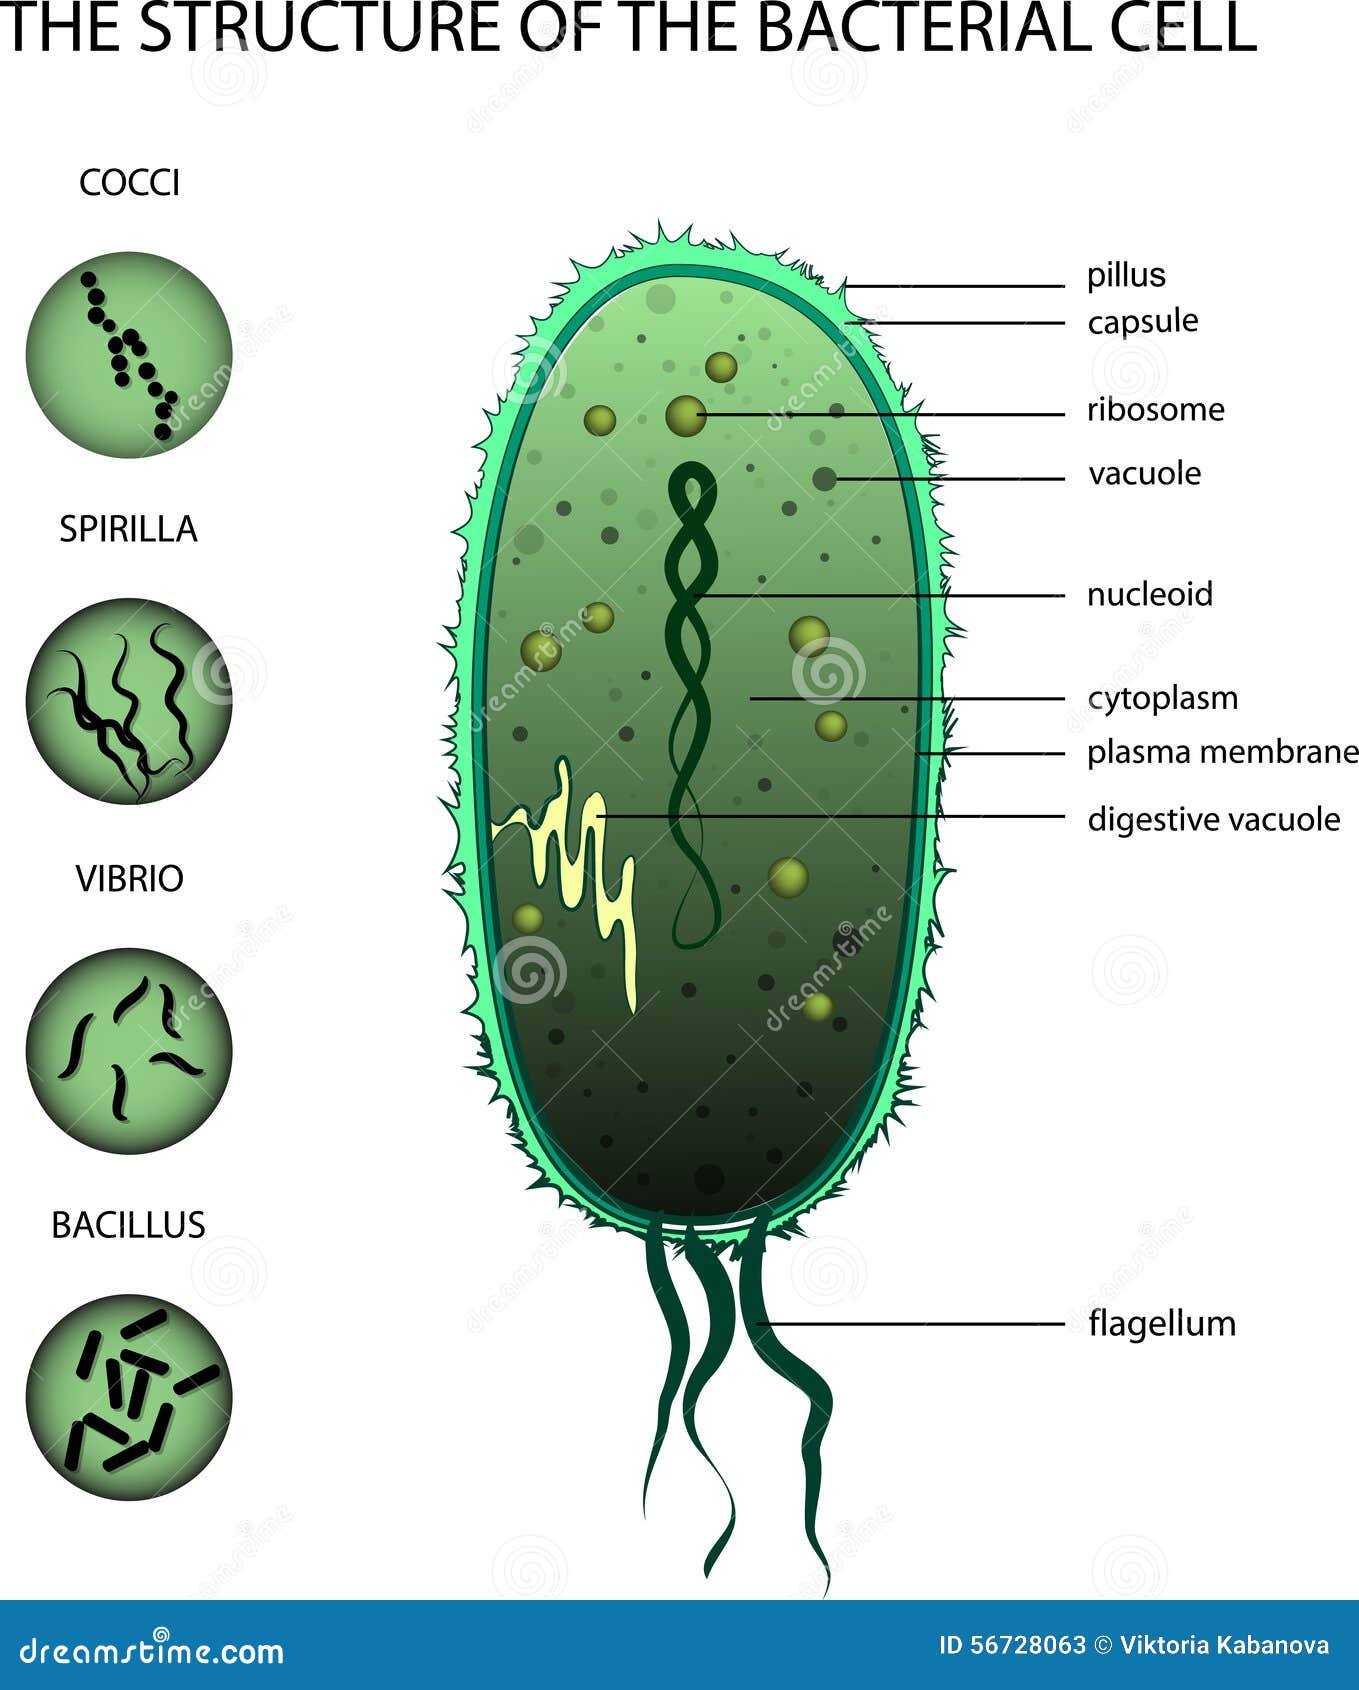 the structure of the bacterial cell